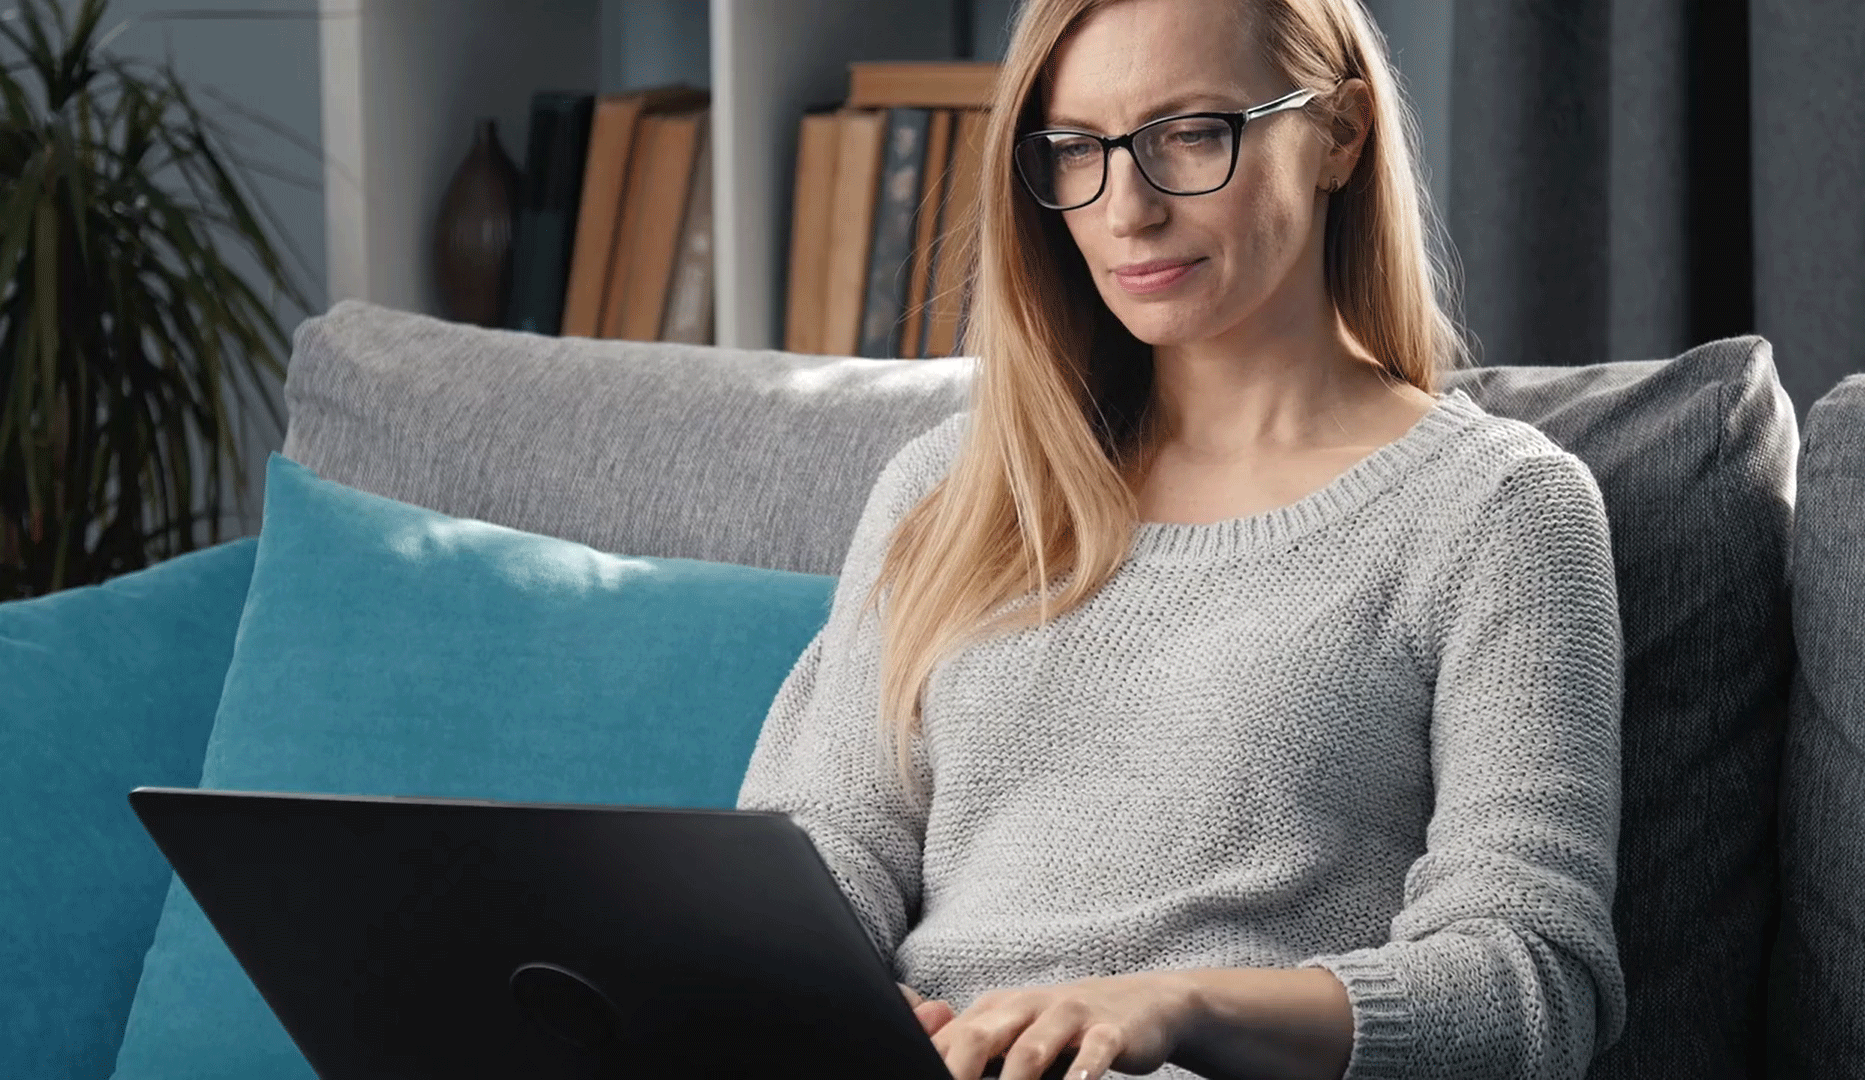 A woman sits on a couch with her laptop in her lap.